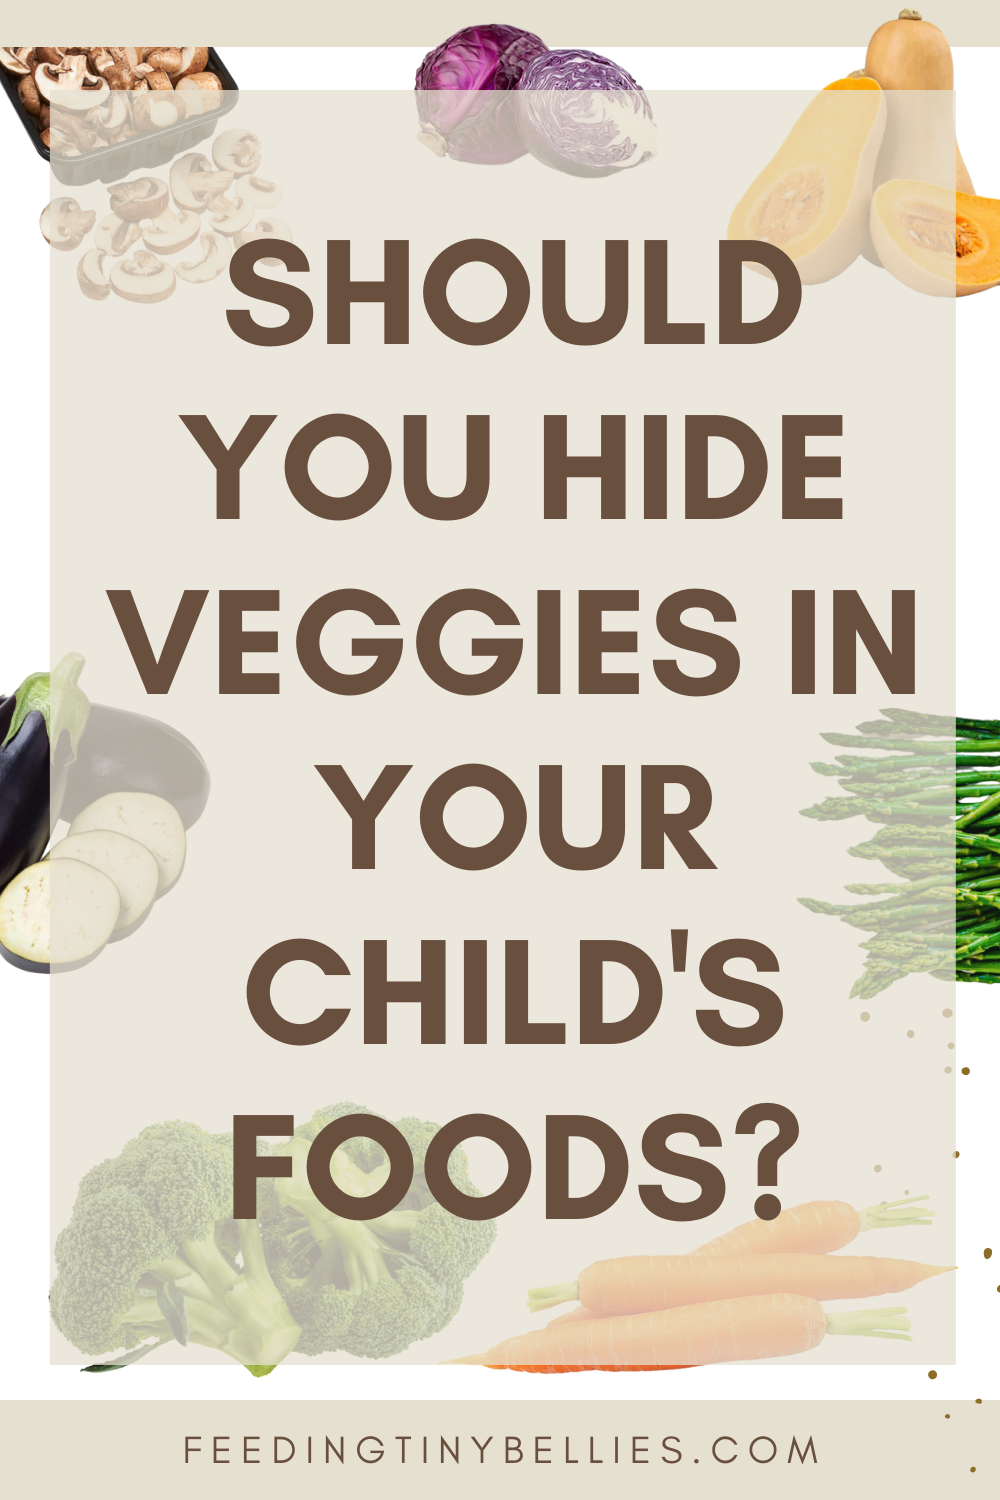 Should you hide veggies in your child's foods?